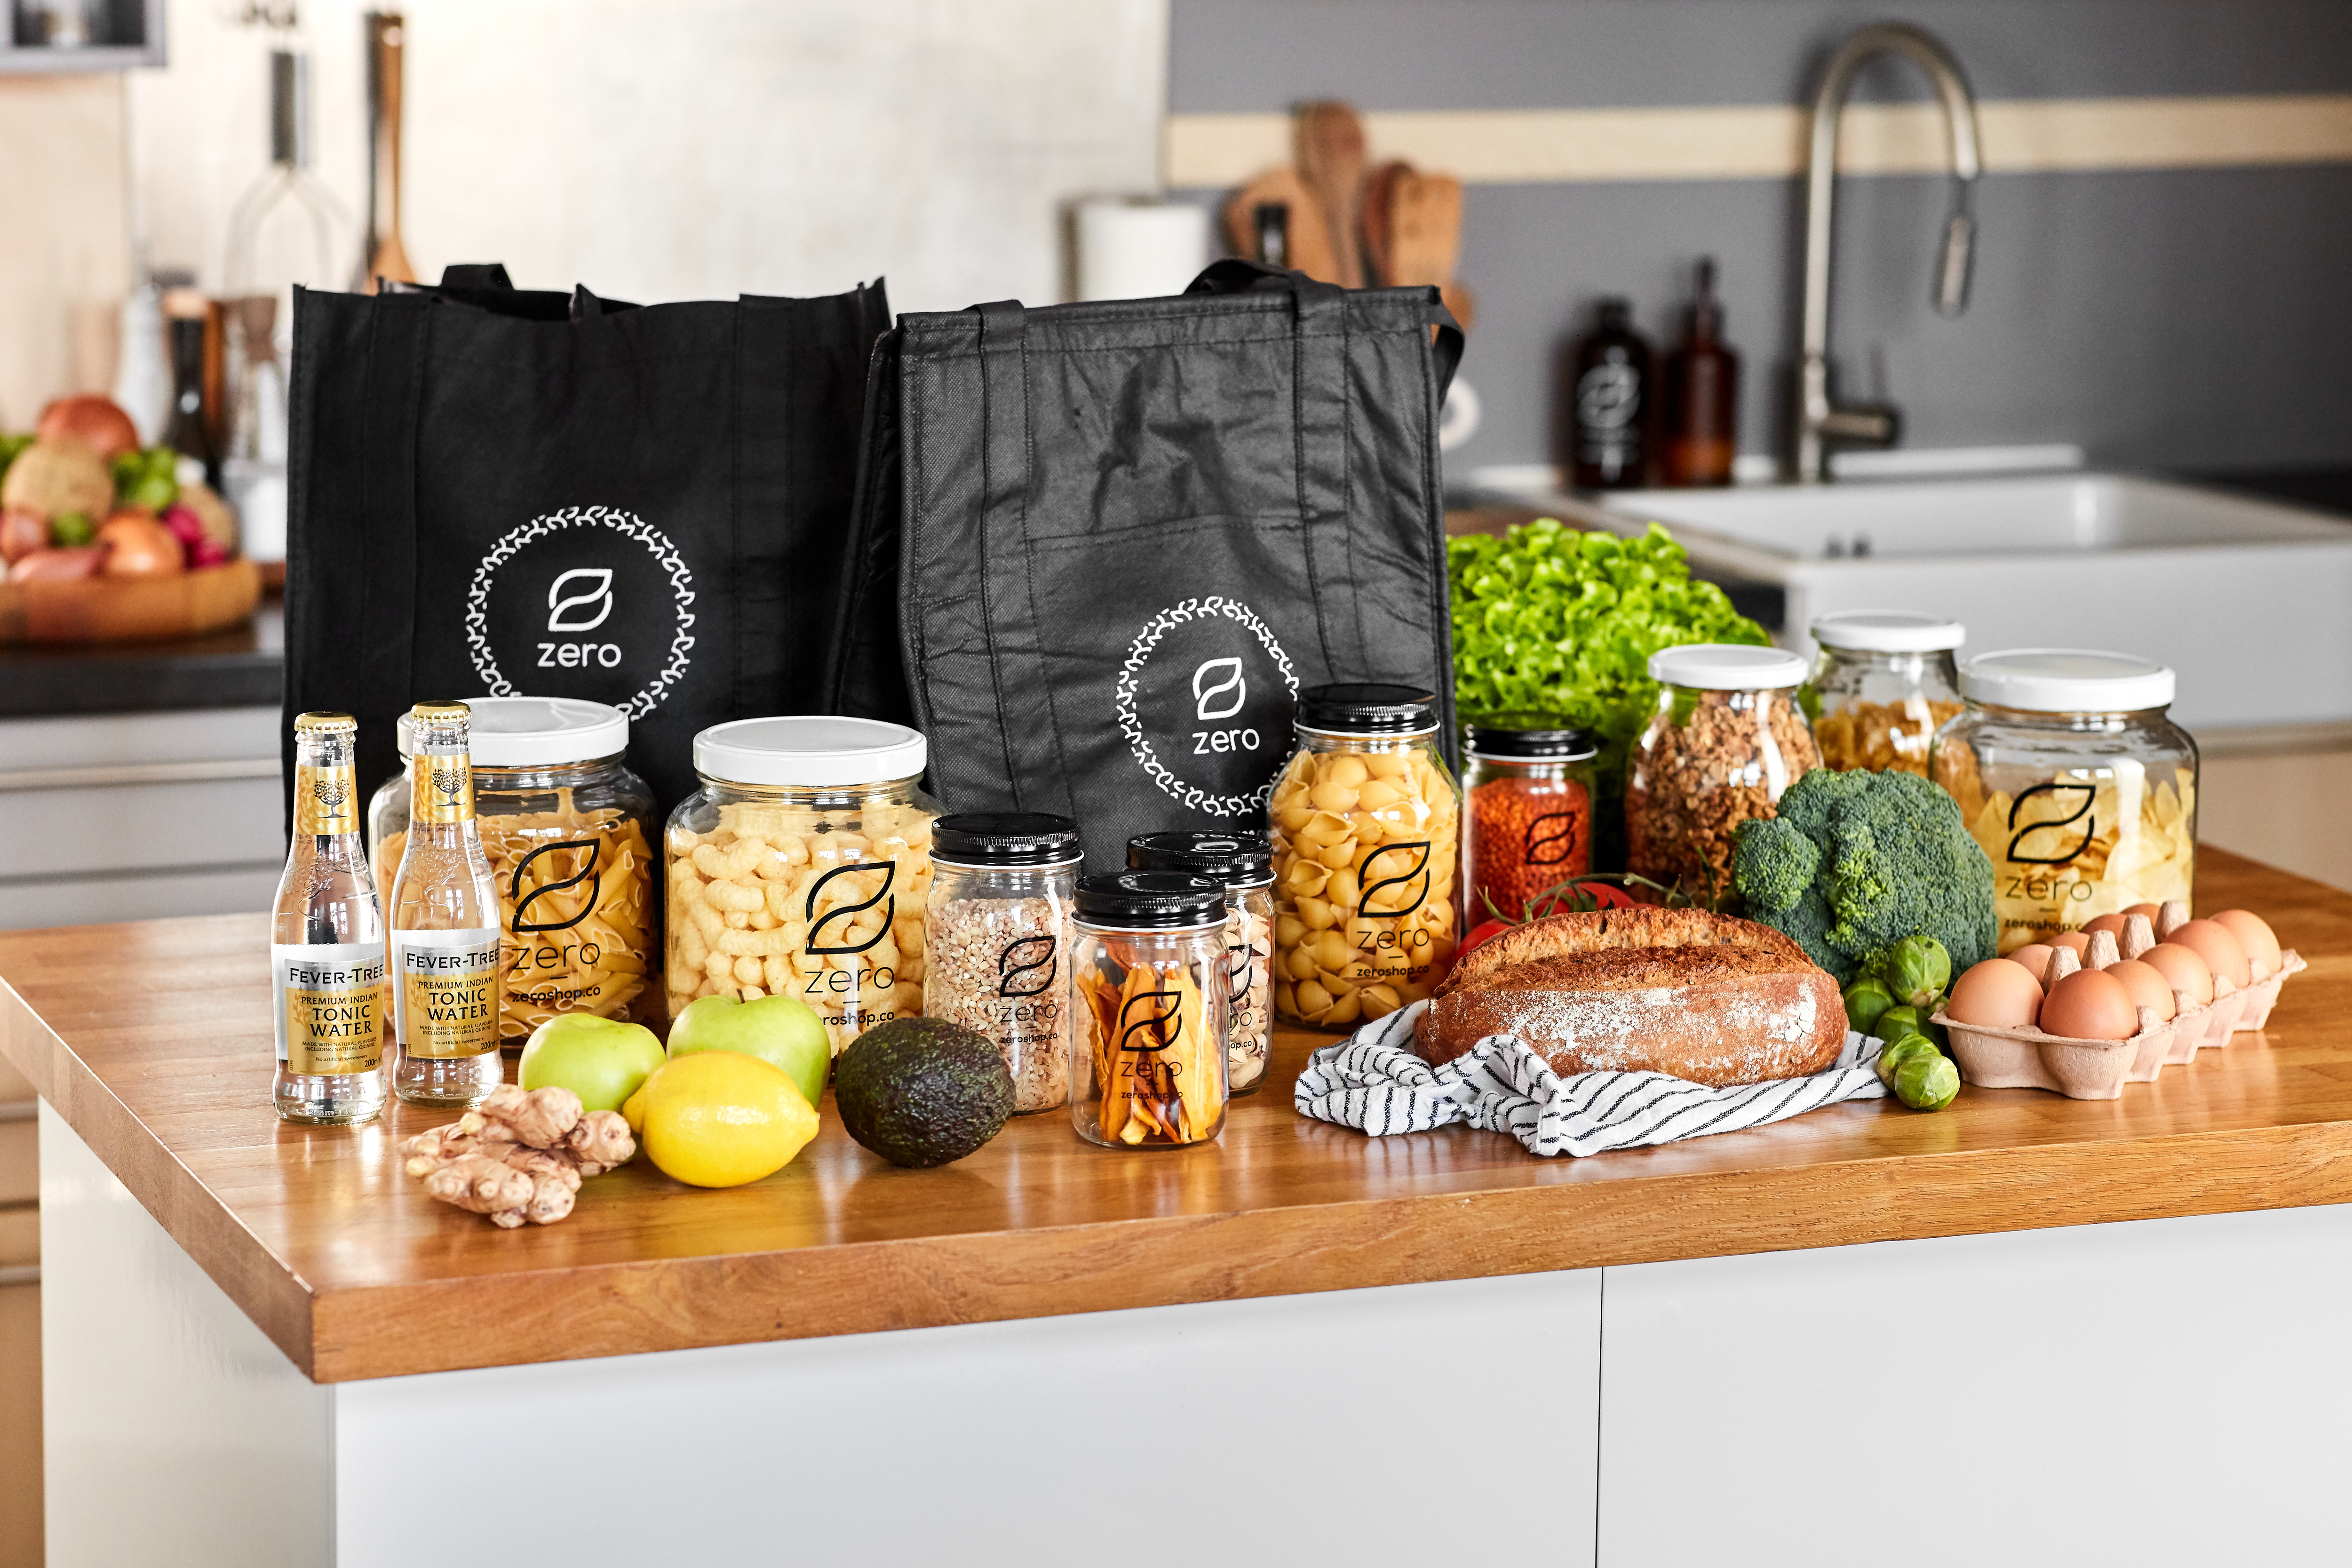 No plastic clamshells here: Zero Grocery aims to eliminate unnecessary plastic in grocery delivery